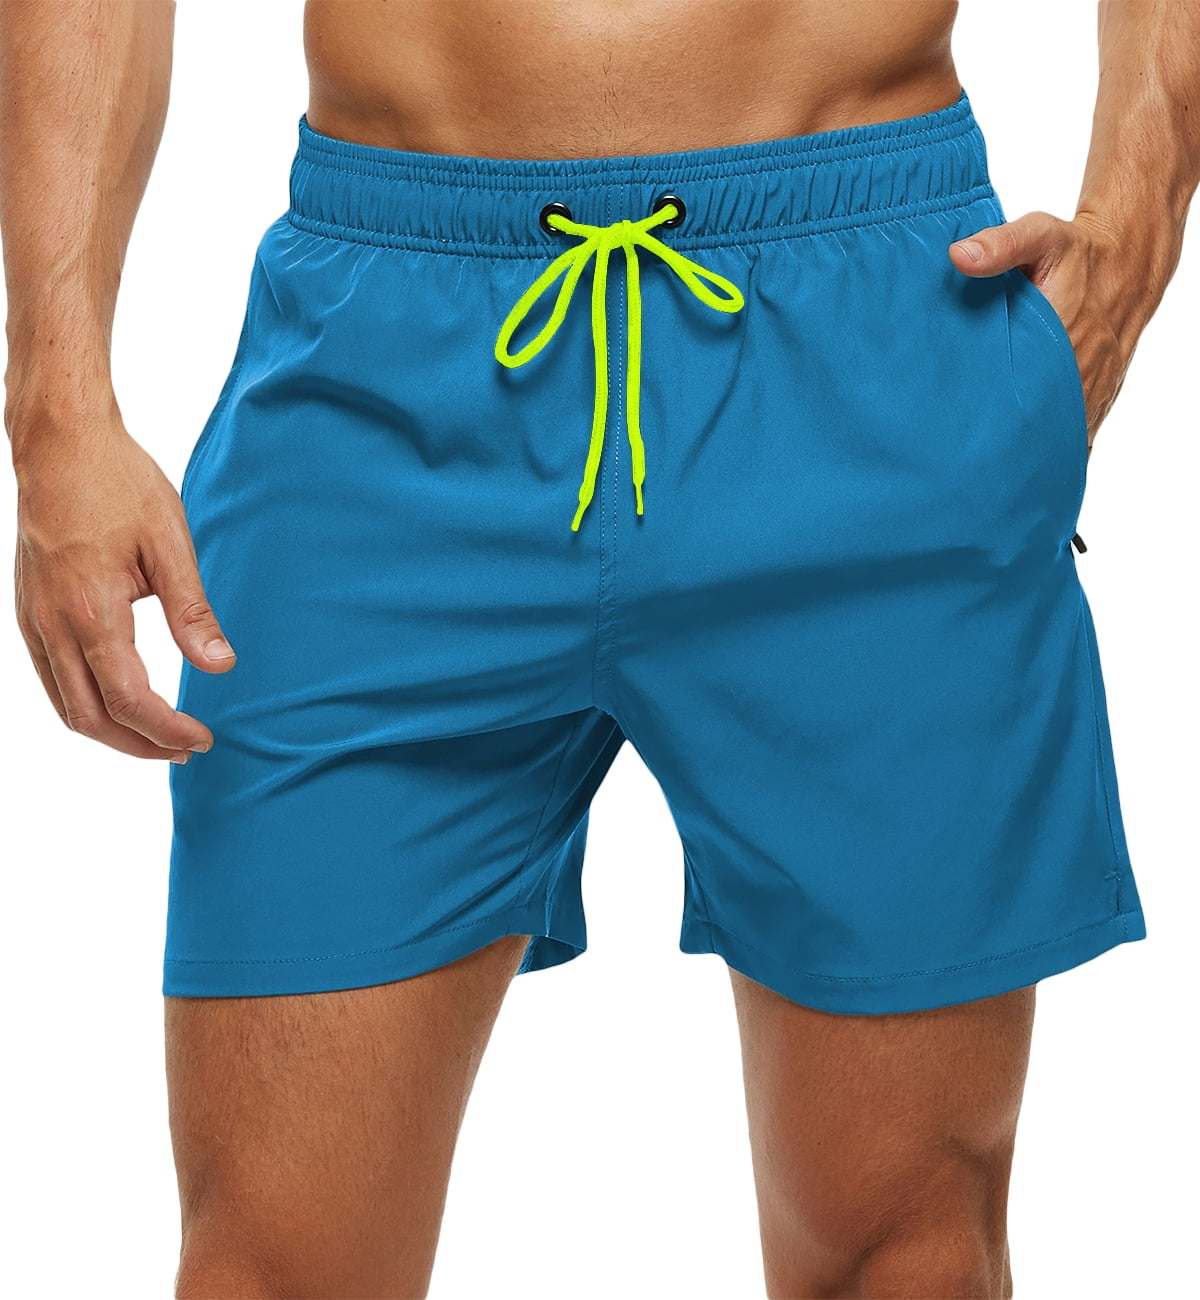 FASUWAVE Mens Swim Trunks Colorful Fruit Quick Dry Beach Board Shorts with Mesh Lining